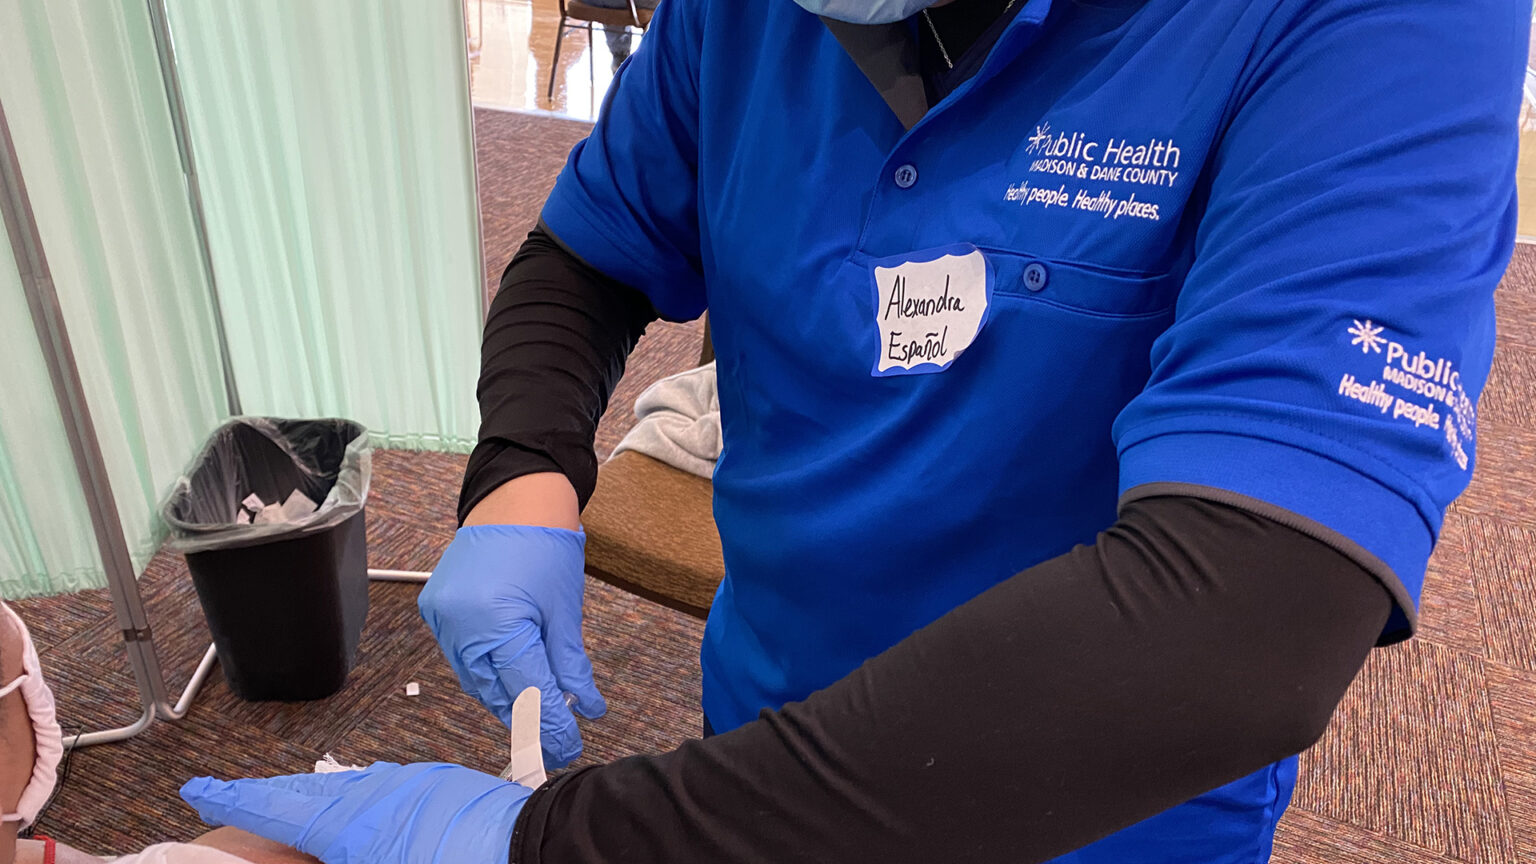 A Public Health Madison & Dane County vaccinator administers an injection.